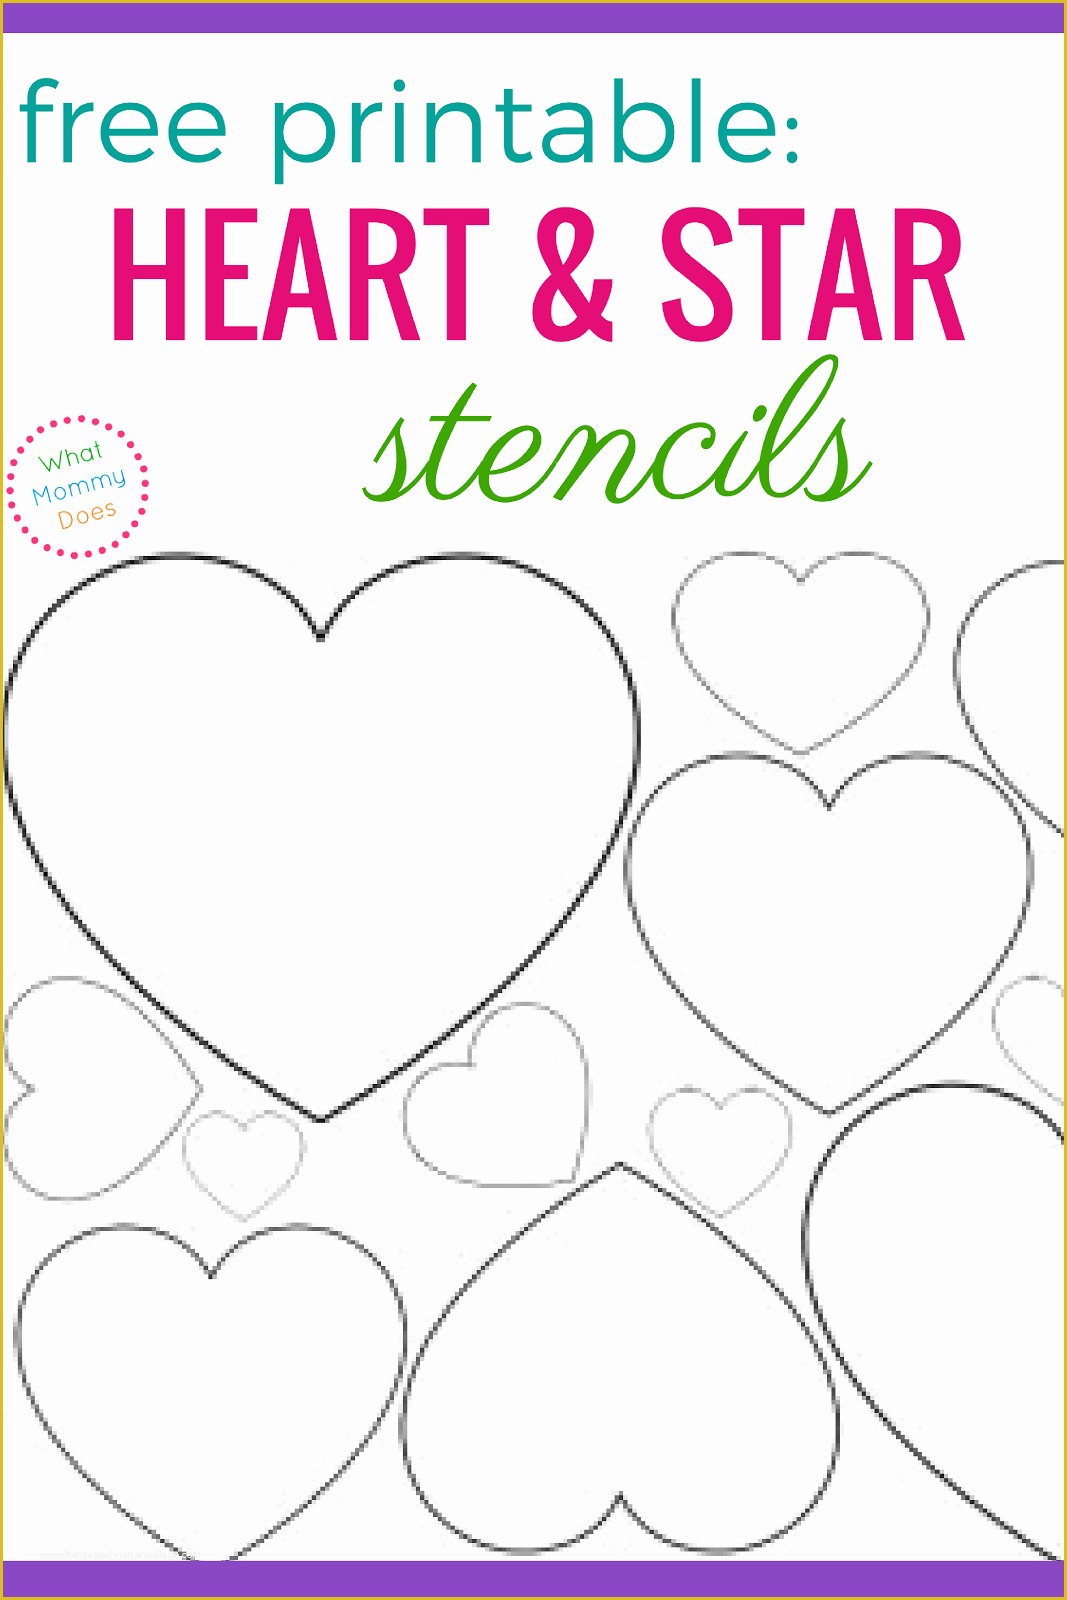 Free Printable Star Template Of Free Printable Heart Stencils & Star Templates